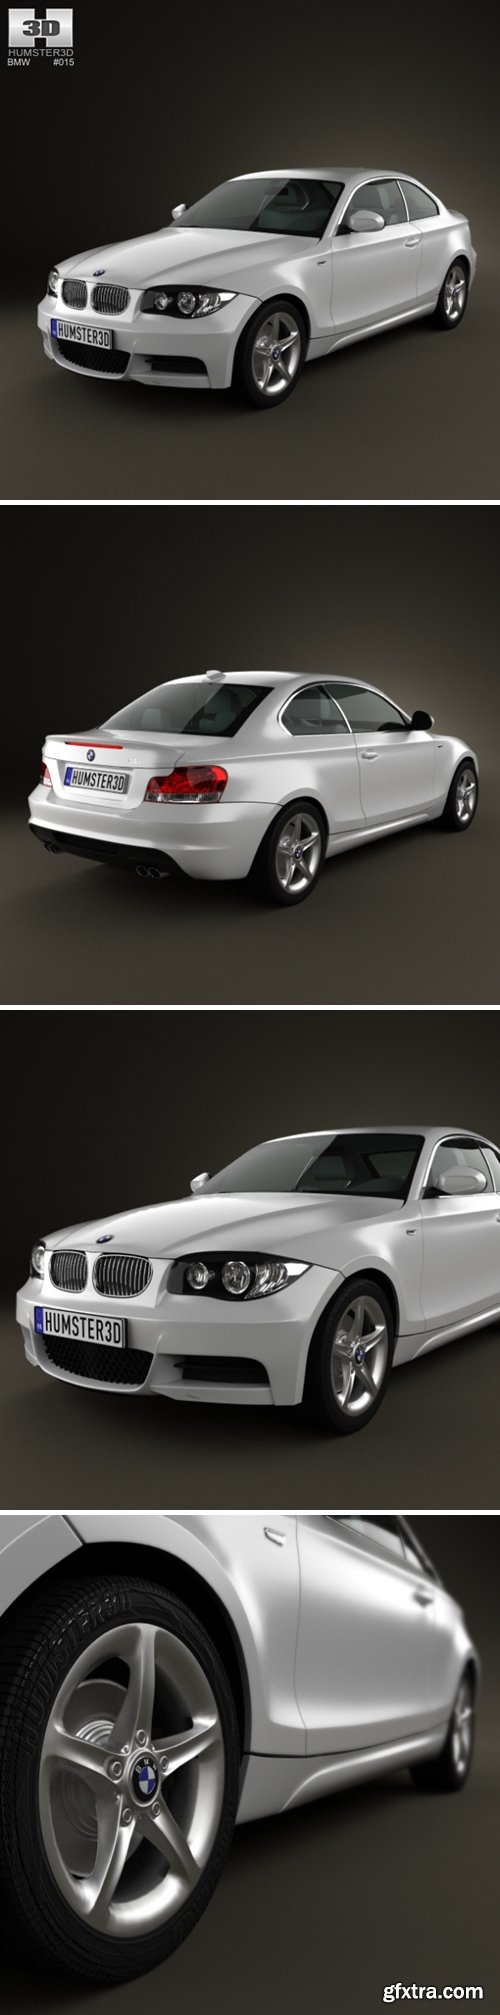 BMW 1 Series coupe 2009 3D Model